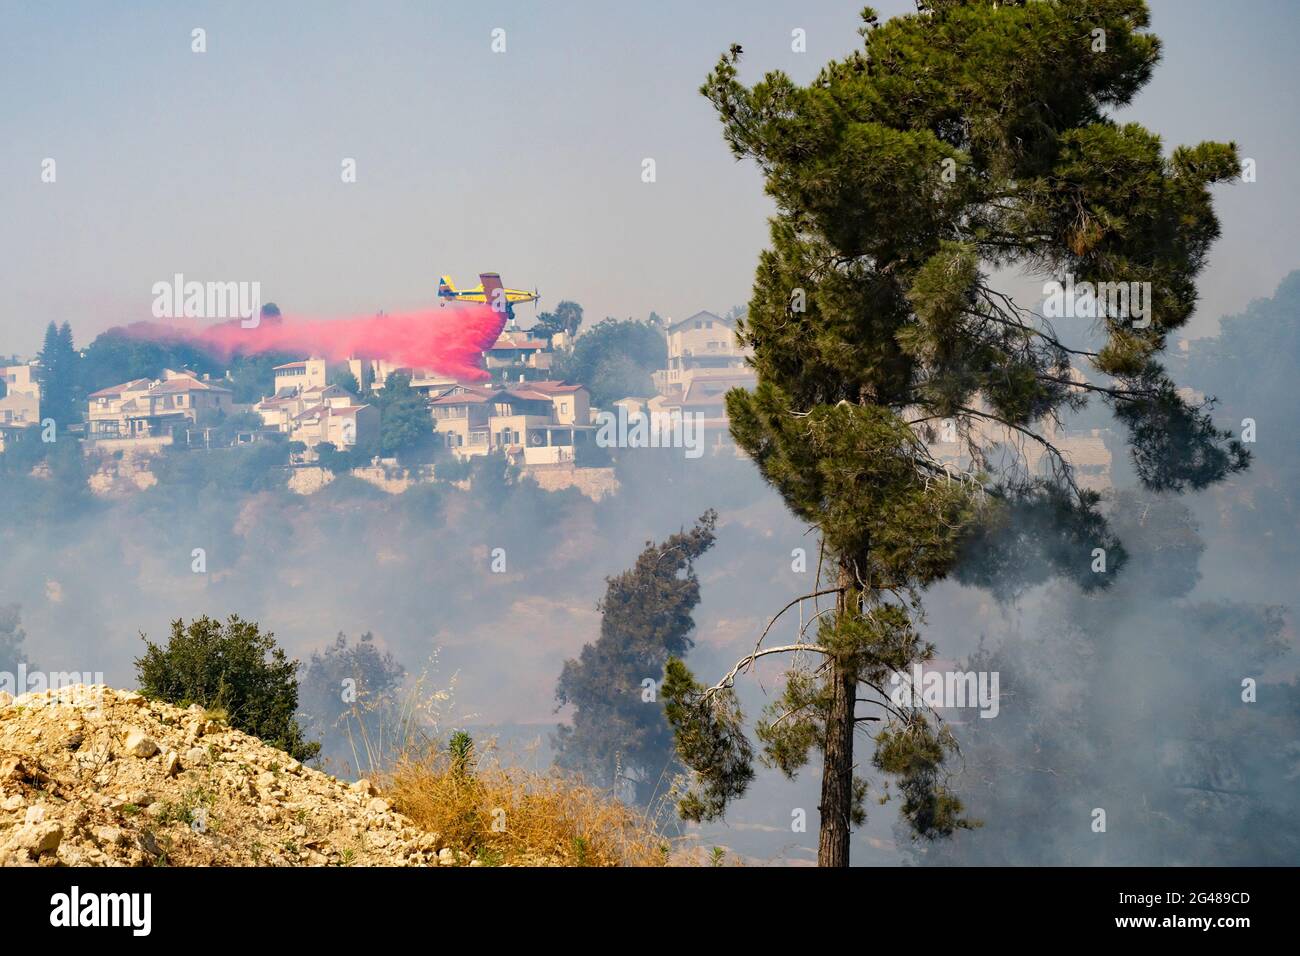 Mevasseret Zion, Israel - June 19th, 2021: A firefighter airplane drops flame retardant over a pine forest fire on the municipal border of a town near Stock Photo